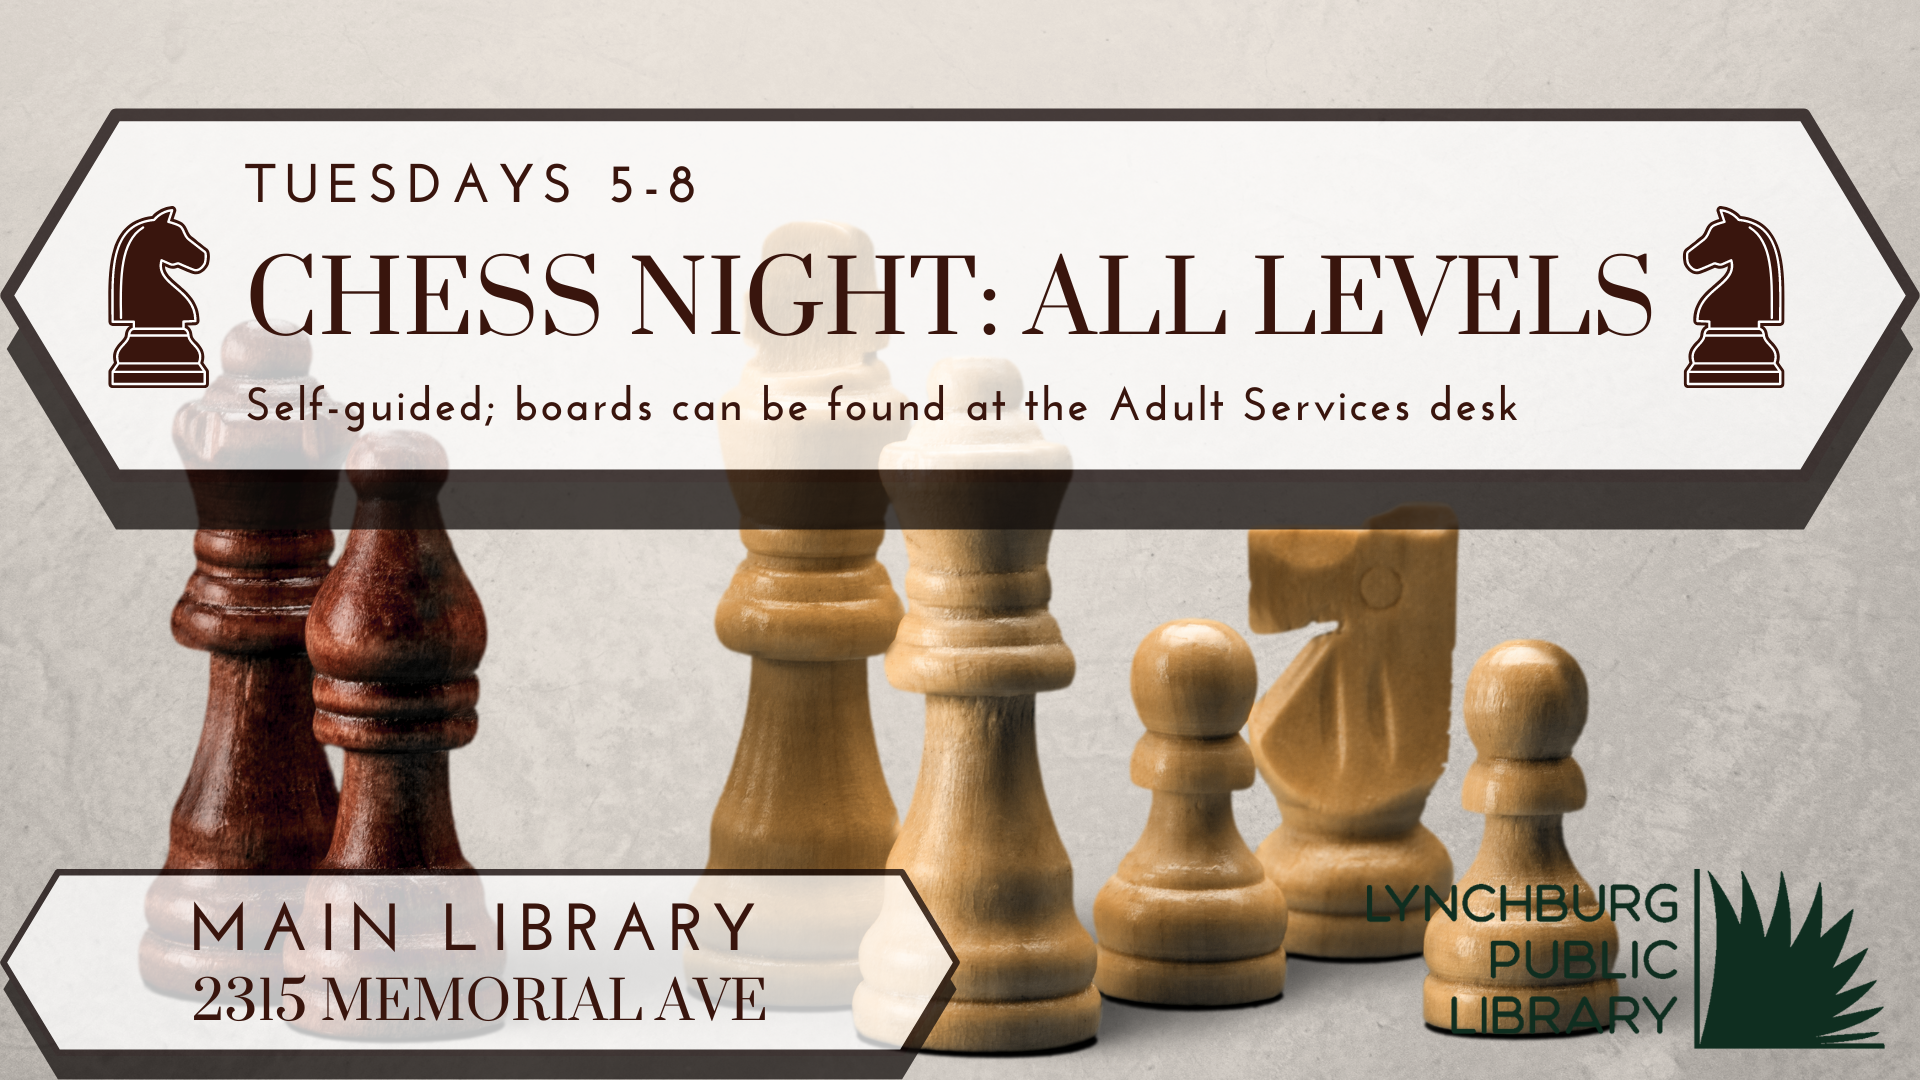 tuesdays 5-8 pm; chess night: all levels; self-guided; boards can be found at the adult services desk; main library, 2315 memorial ave